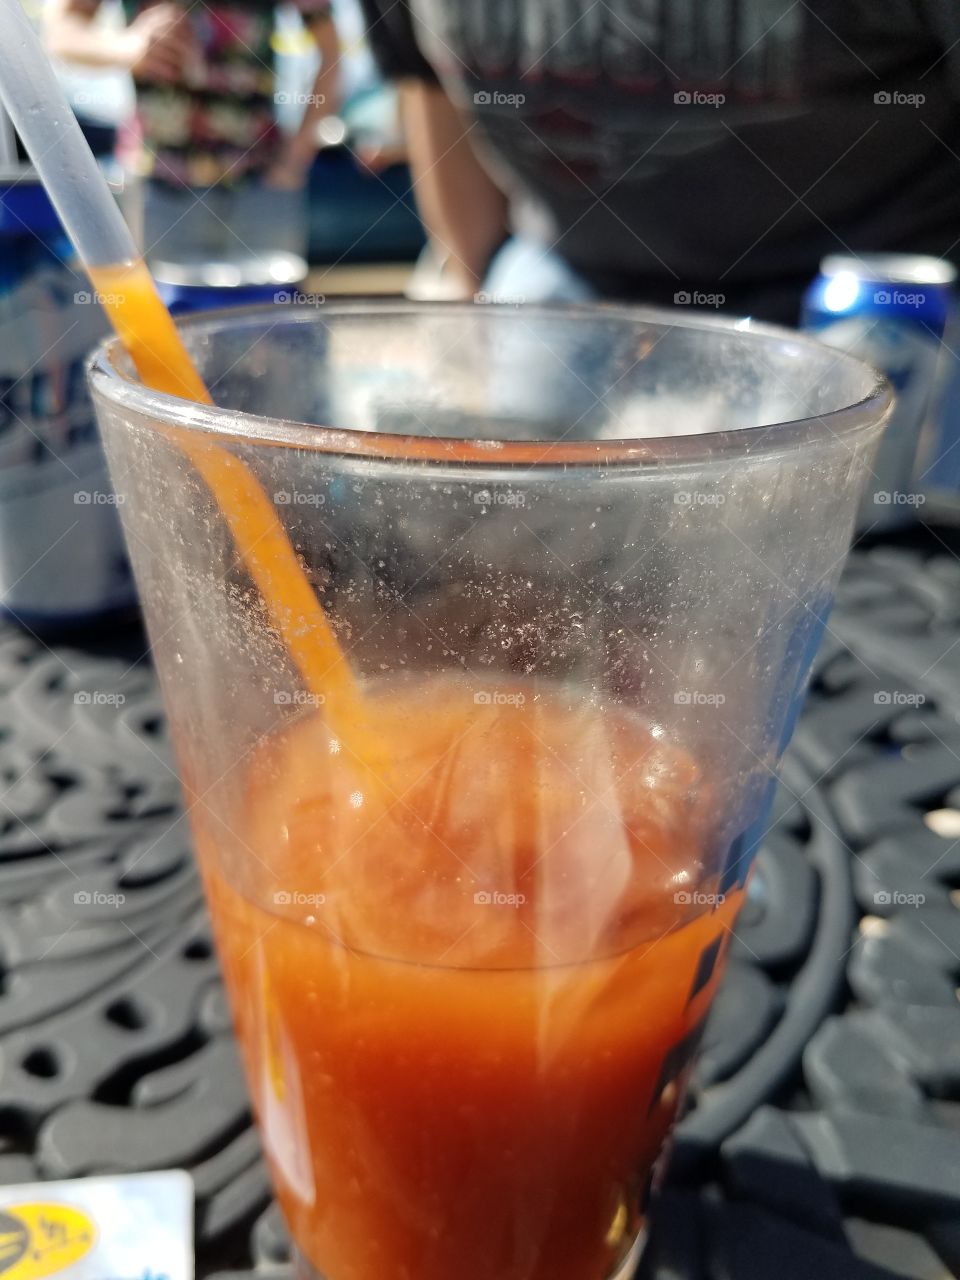 Enjoying a bloody Mary.  fascinated the drink stayed in the straw.